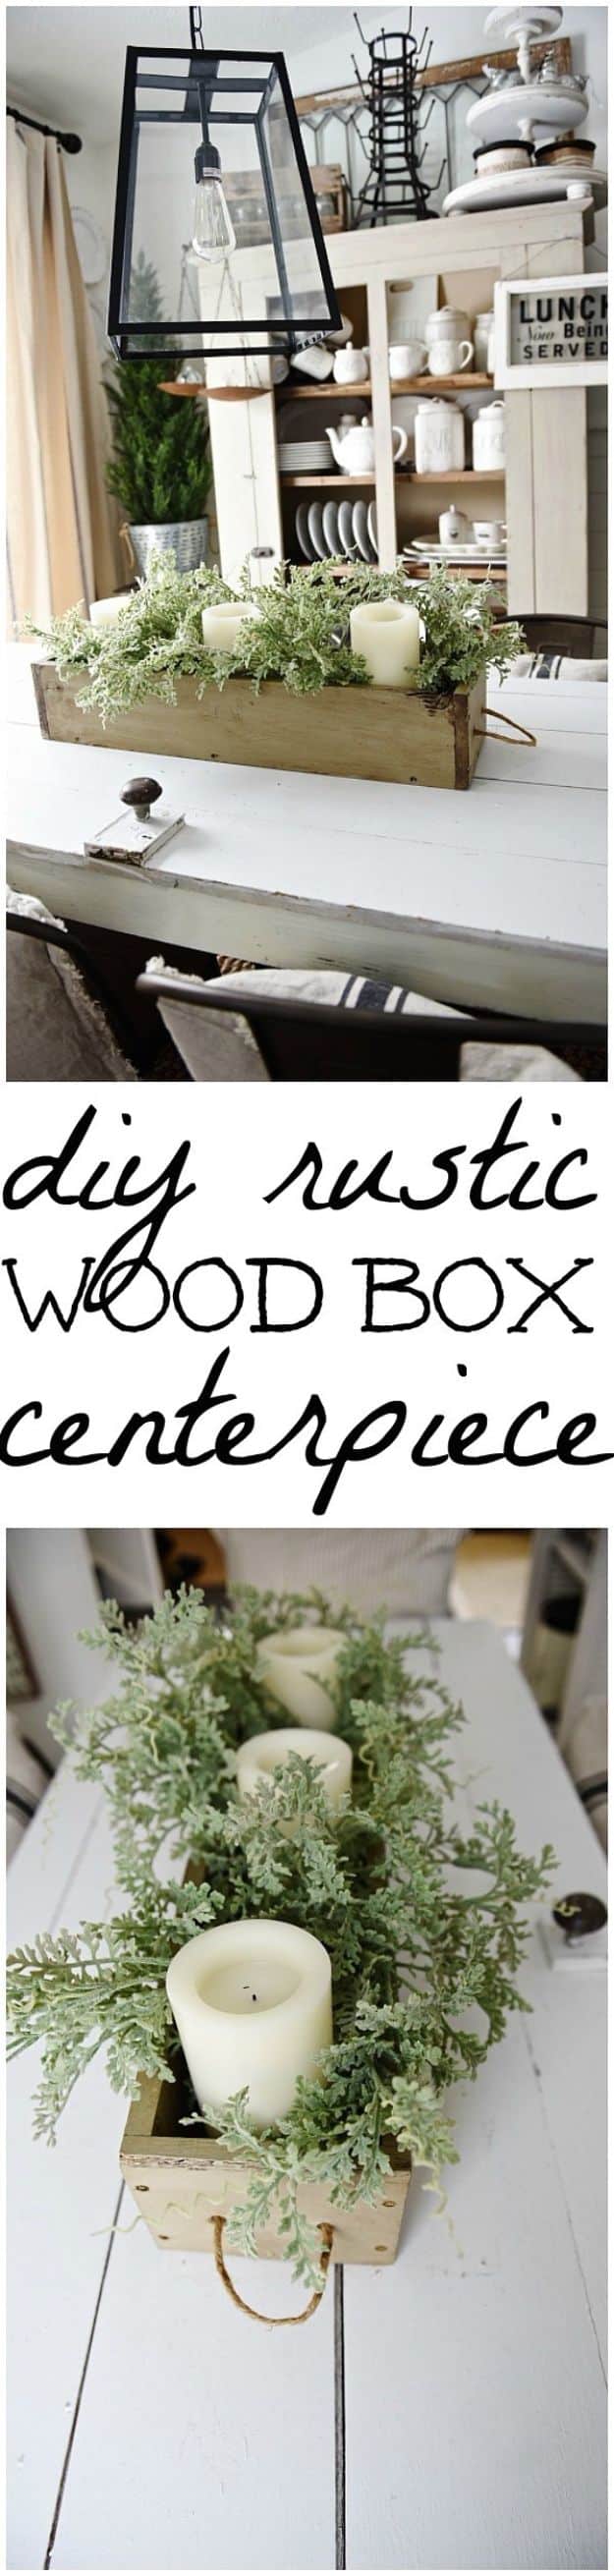 DIY Modern Home Decor - DIY Woodbox Centerpiece - Room Ideas, Wall Art on A Budget, Farmhouse Style Projects - Easy DIY Ideas and Decorations for Apartments, Living Room, Bedroom, Kitchen and Bath - Fixer Upper Tips and Tricks 